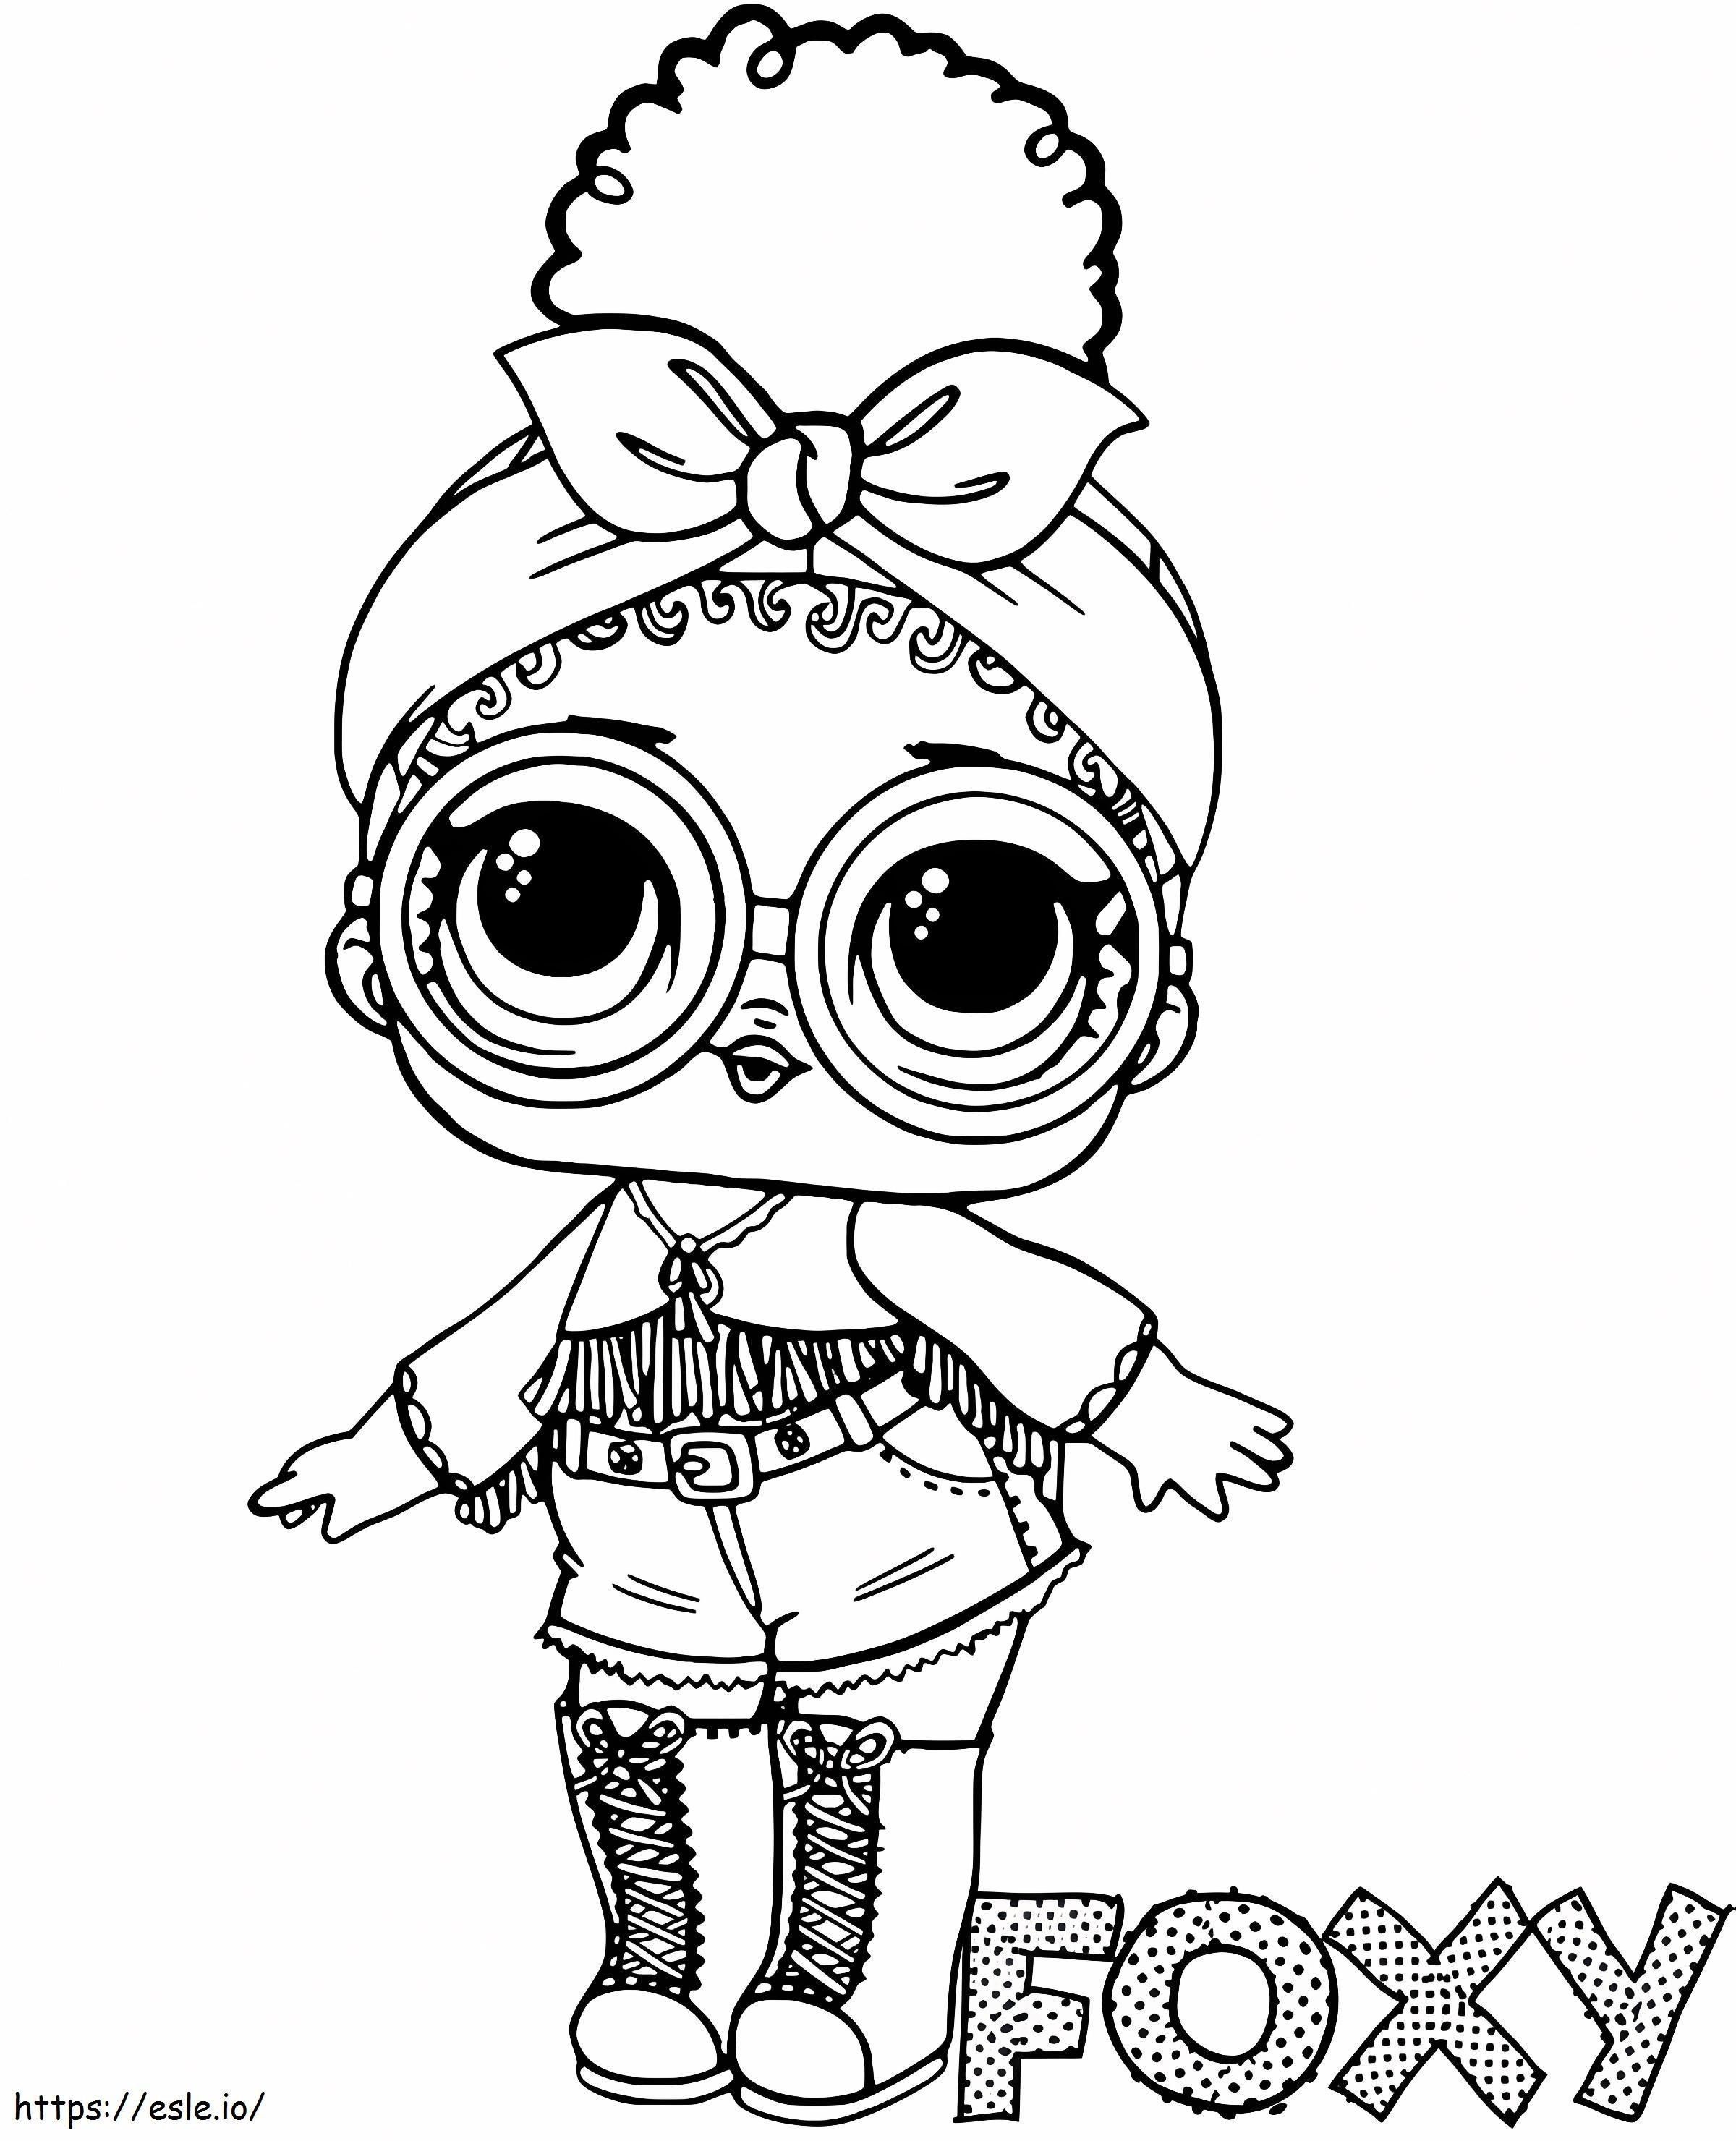 1572569790 Foxy Doll Lol Surprise coloring page